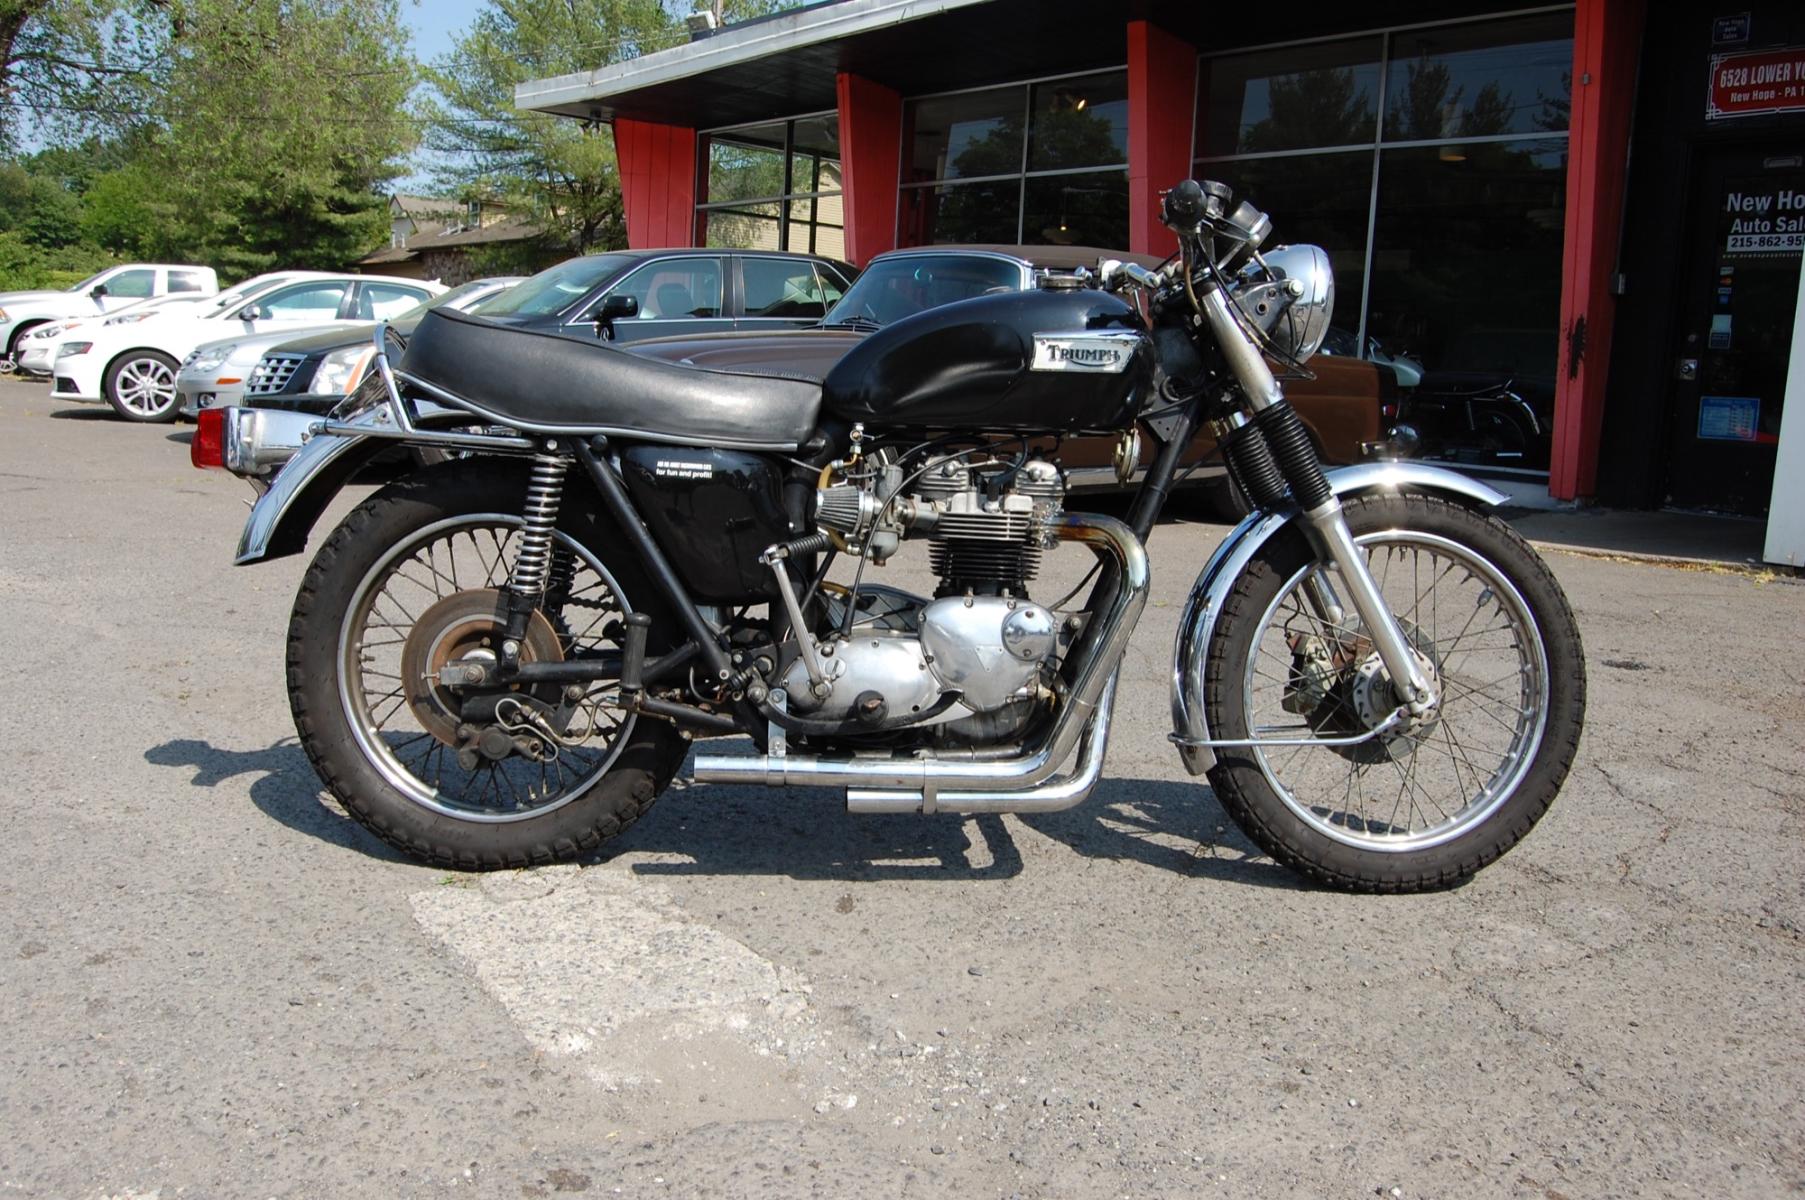 1977 Black Triumph Bonneville (T140VKP7690) , Manual transmission, located at 6528 Lower York Road, New Hope, PA, 18938, (215) 862-9555, 40.358707, -74.977882 - Here we have a very cool Triumph Bonneville 750. The engine was recently rebuilt and has good compression. 5 speed gearbox, black paint with Chrome accents. Starts right up and is ready to ride. Give us a call with any questions you may have at 215-862-9555. All prices exclude tax, tags, and our dea - Photo #3